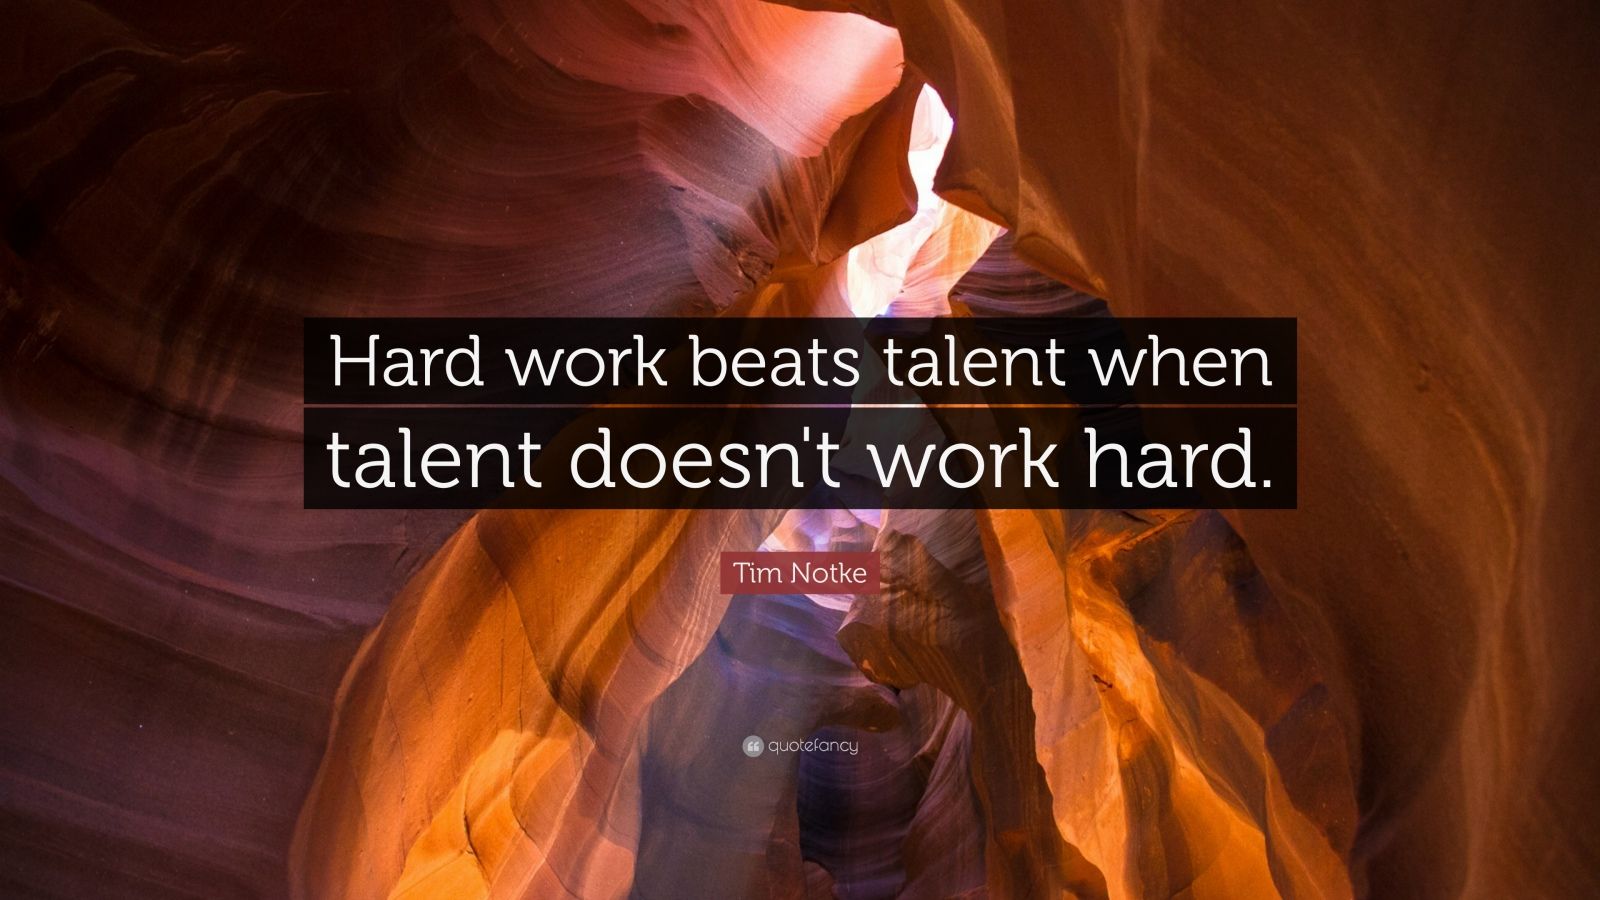 talent hard work beats when doesn quote notke tim quotes wallpaper quotefancy motivational